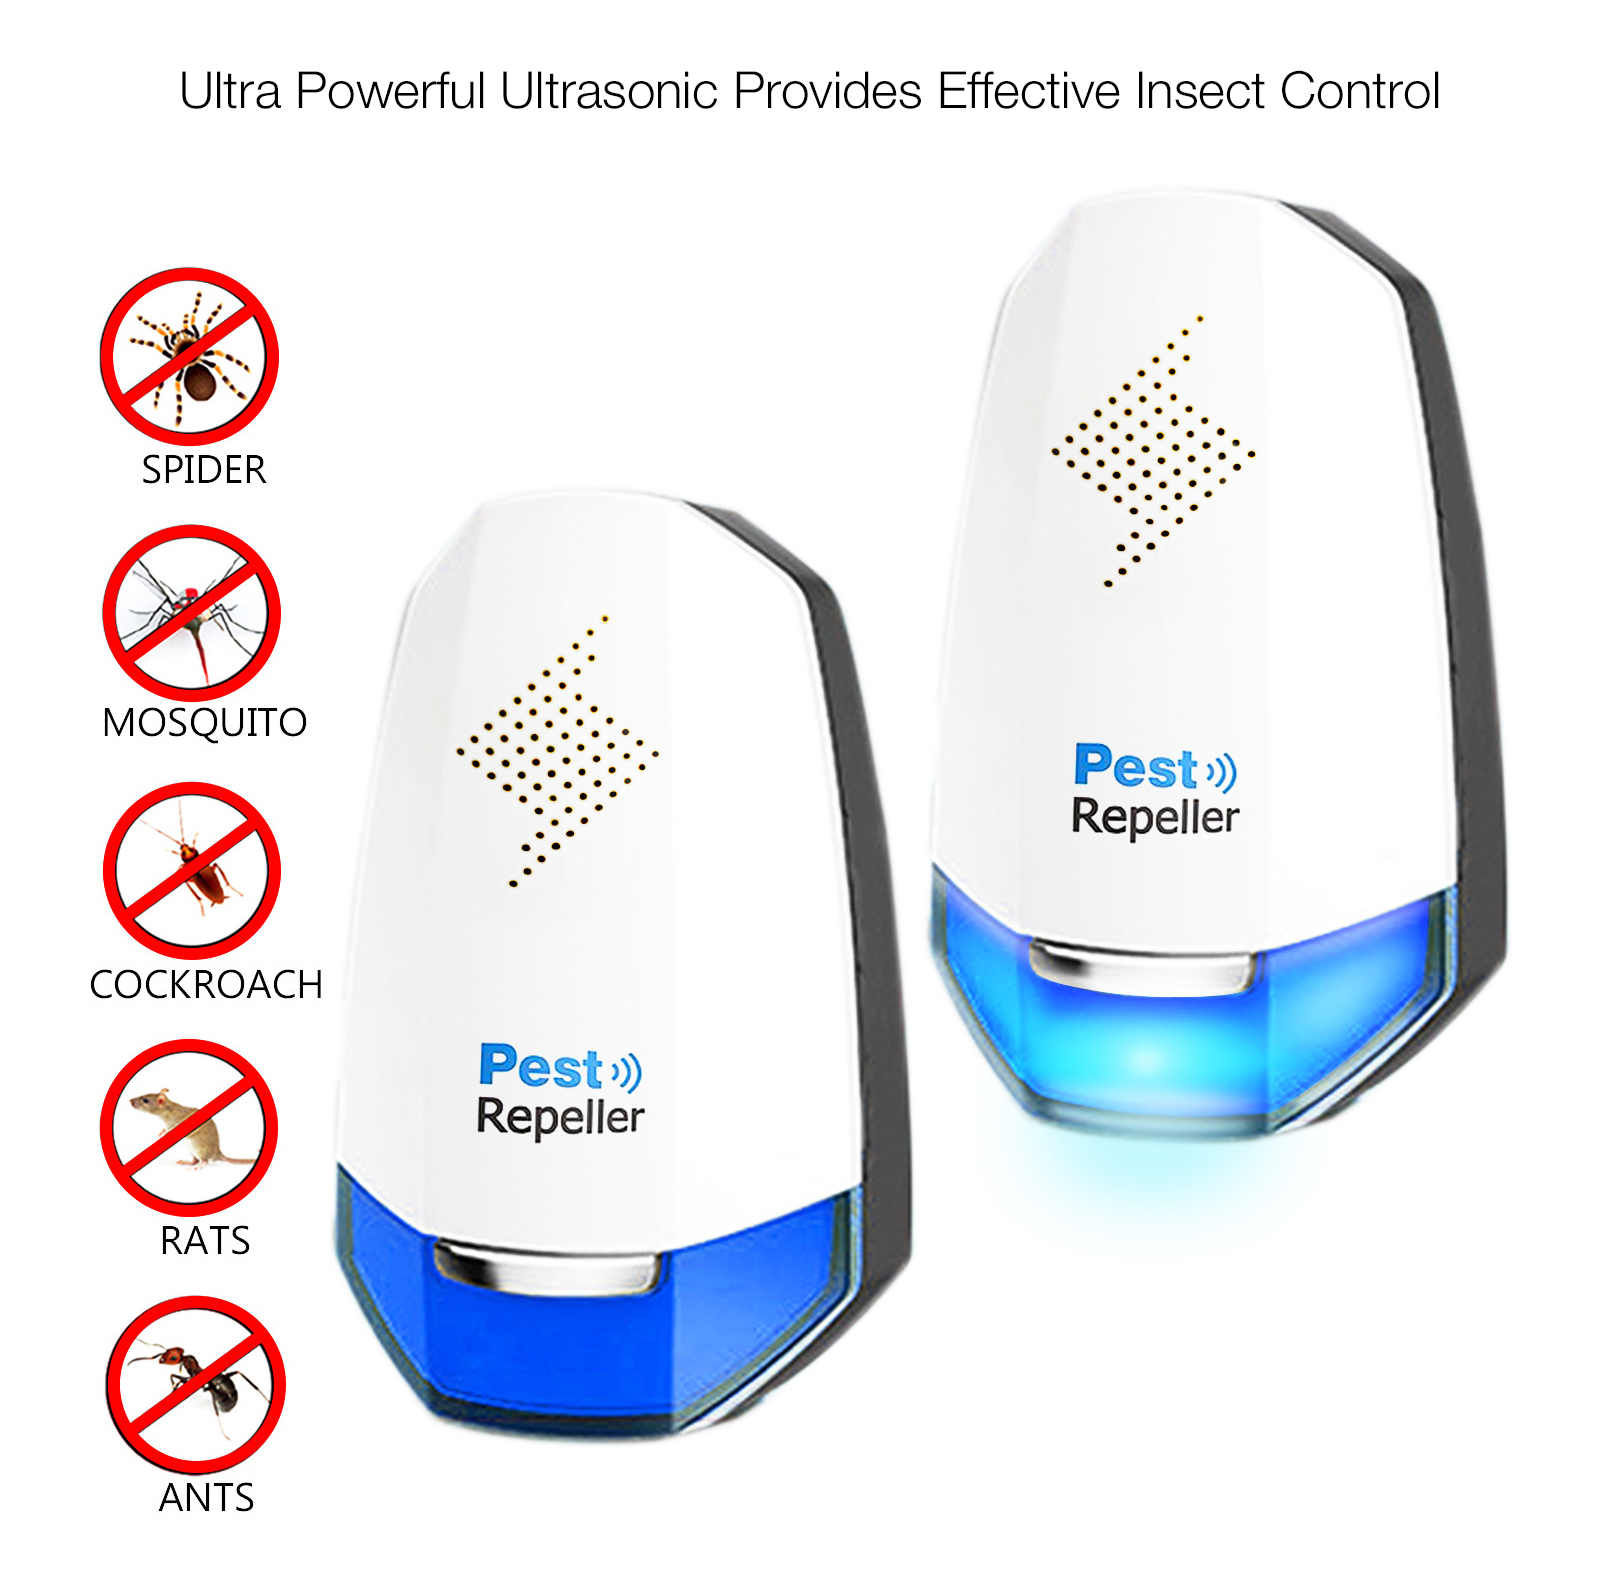 Loskii-HP-201-Indoor-Plug-in-LED-Electronic-Ultrasonic-Mosquito-Pest-Repeller-Non-Chemical-Insect-Co-1290185